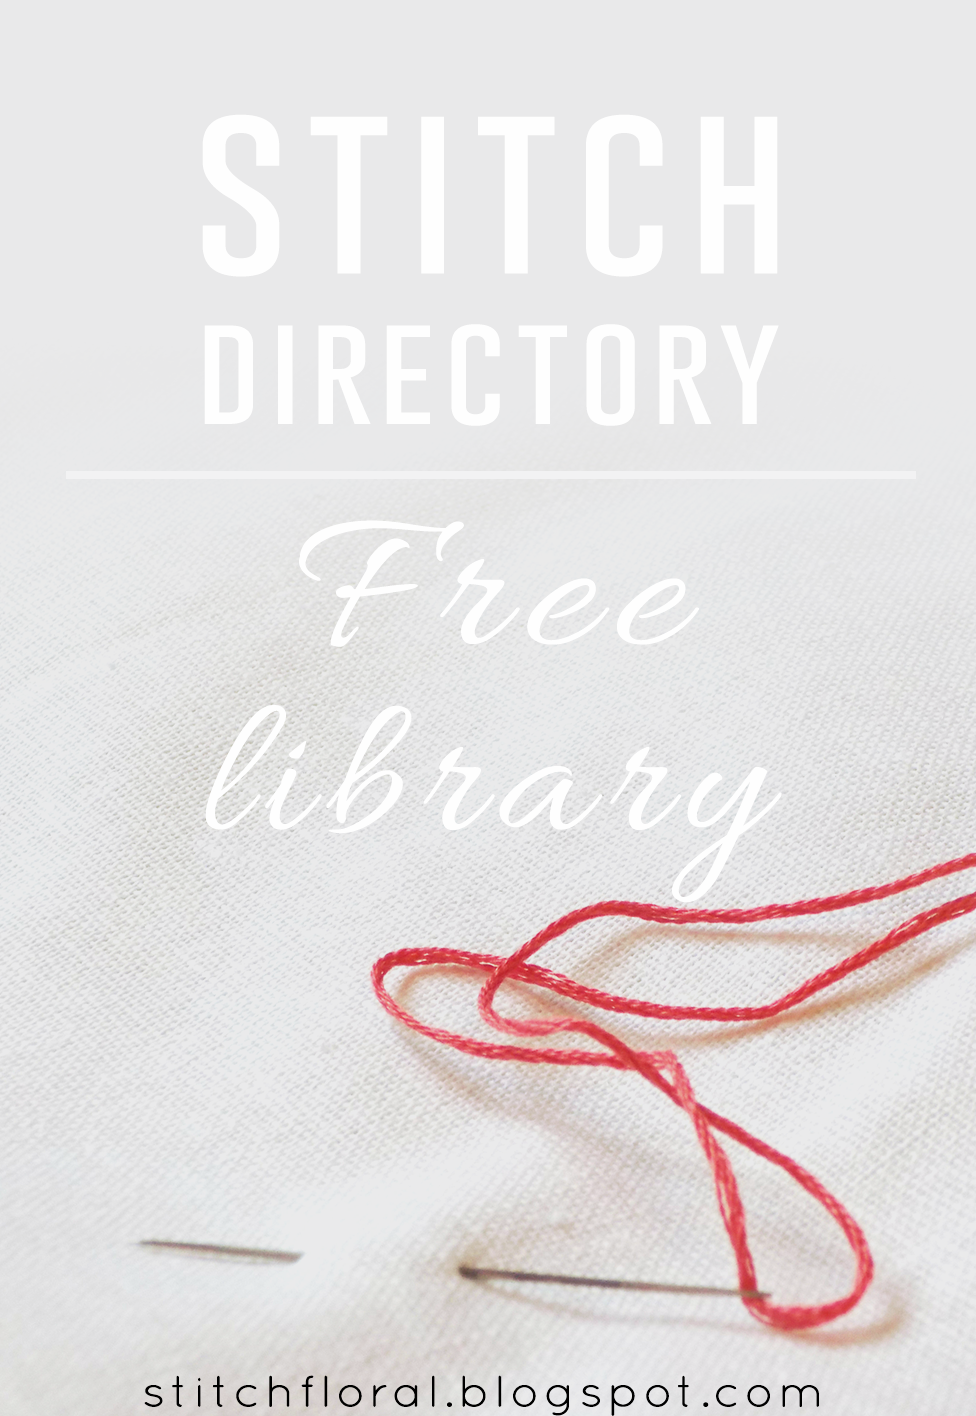 Tips for sewing with felt - The Sewing Directory